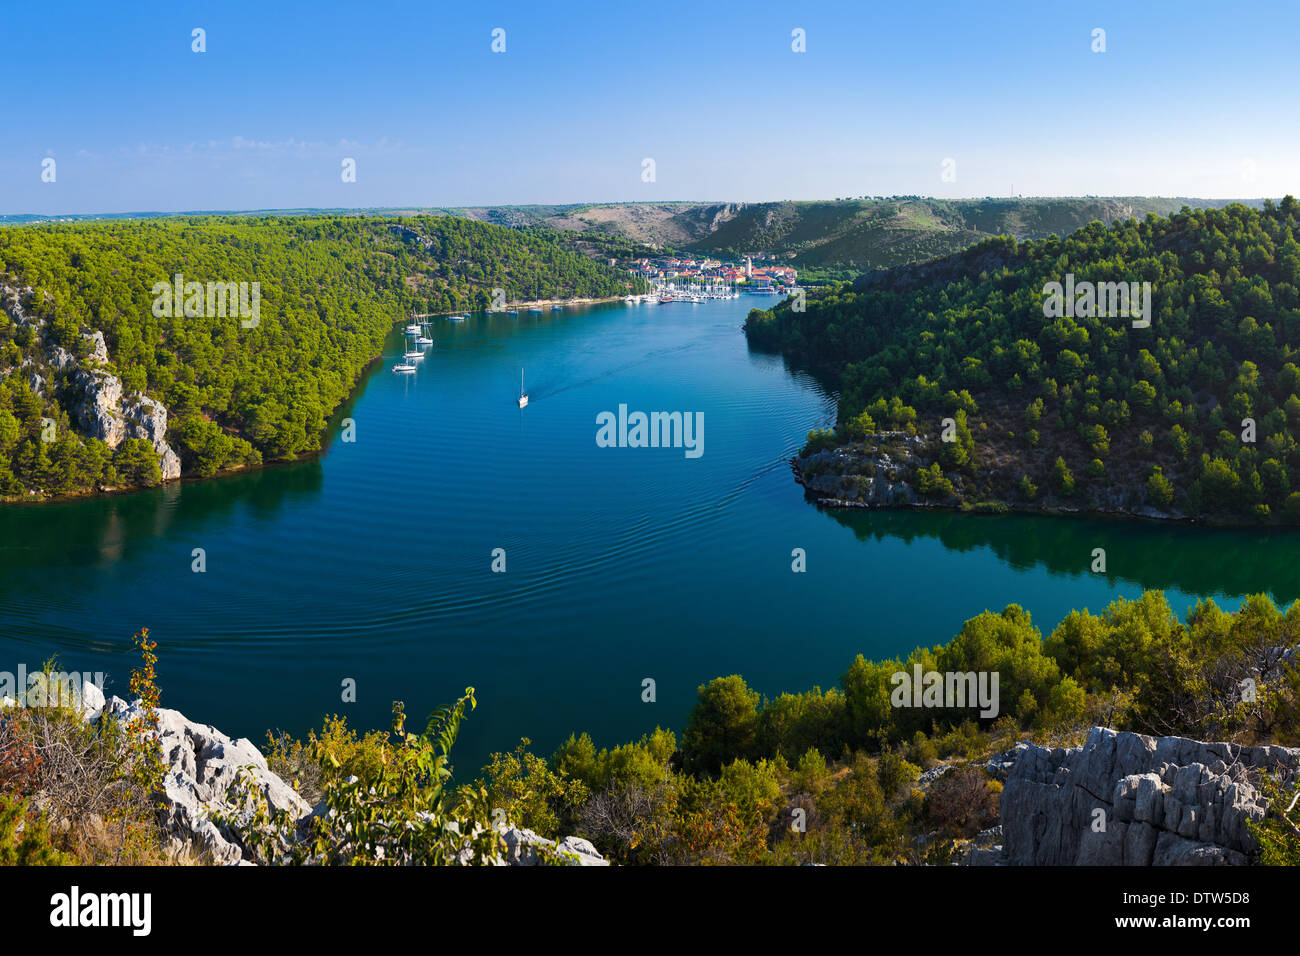 River Krka and town in Croatia Stock Photo